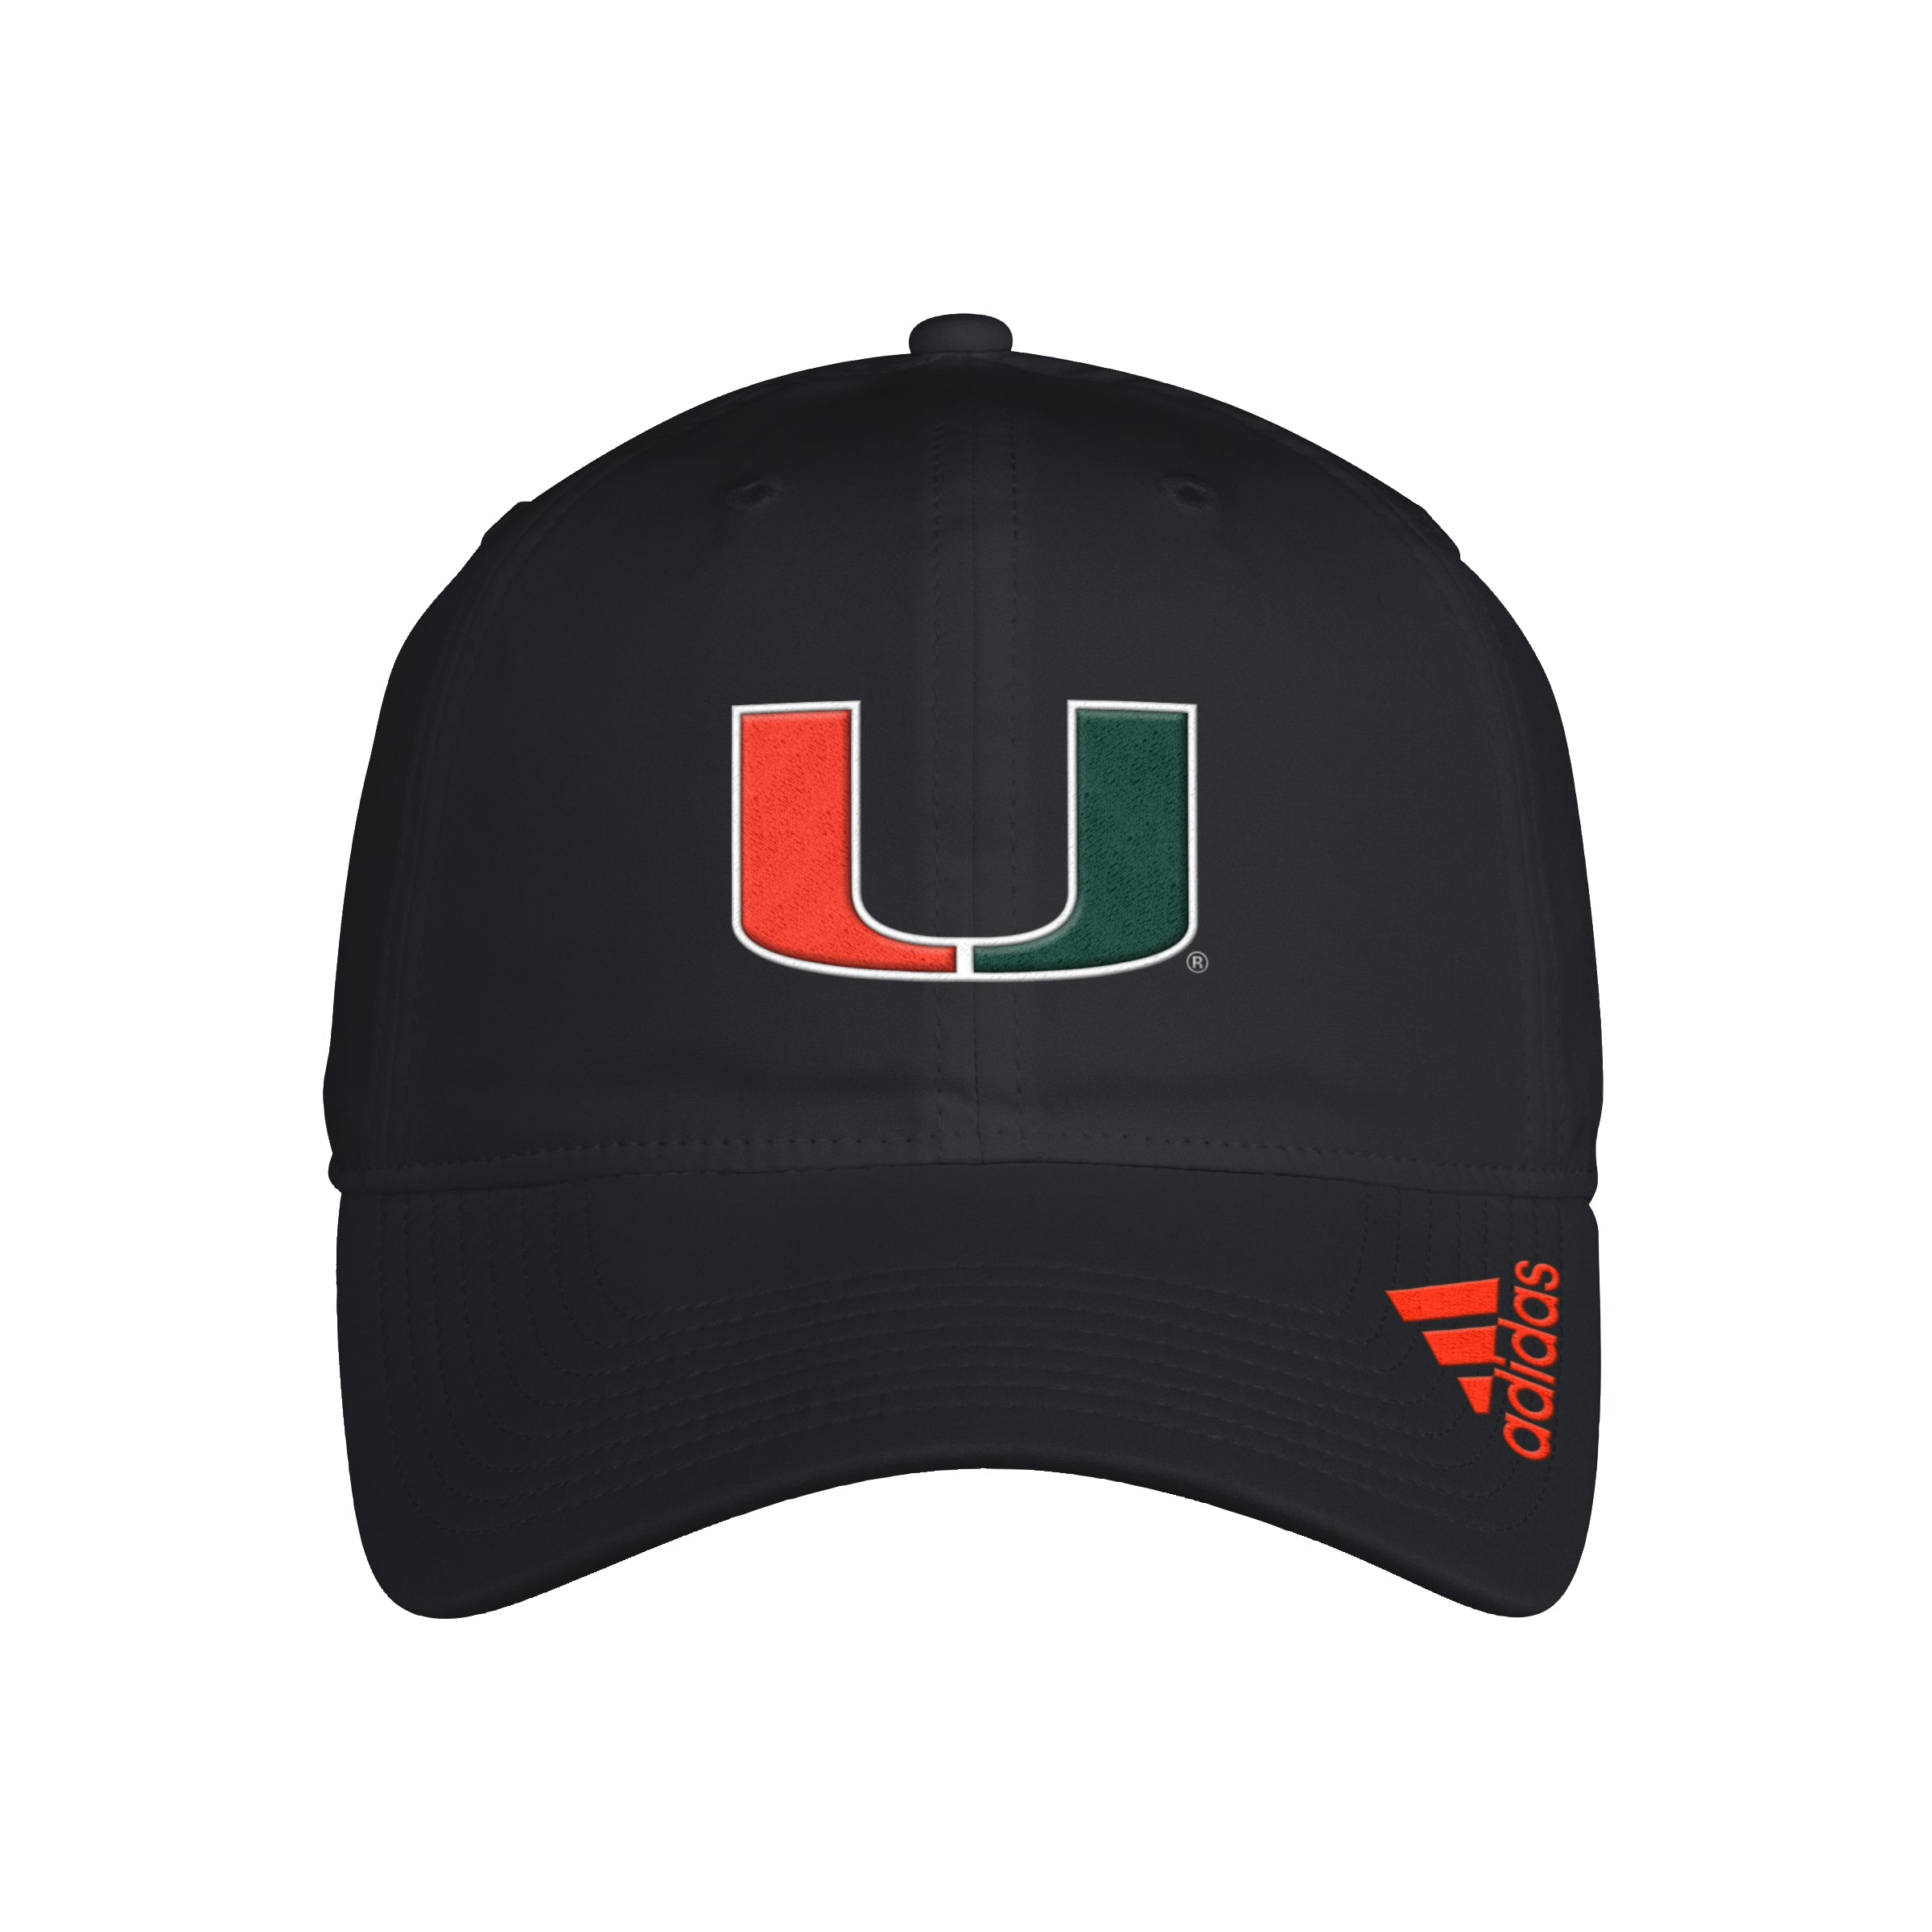 Miami Hurricanes adidas Coaches Slouch Adjustable Hat - Black